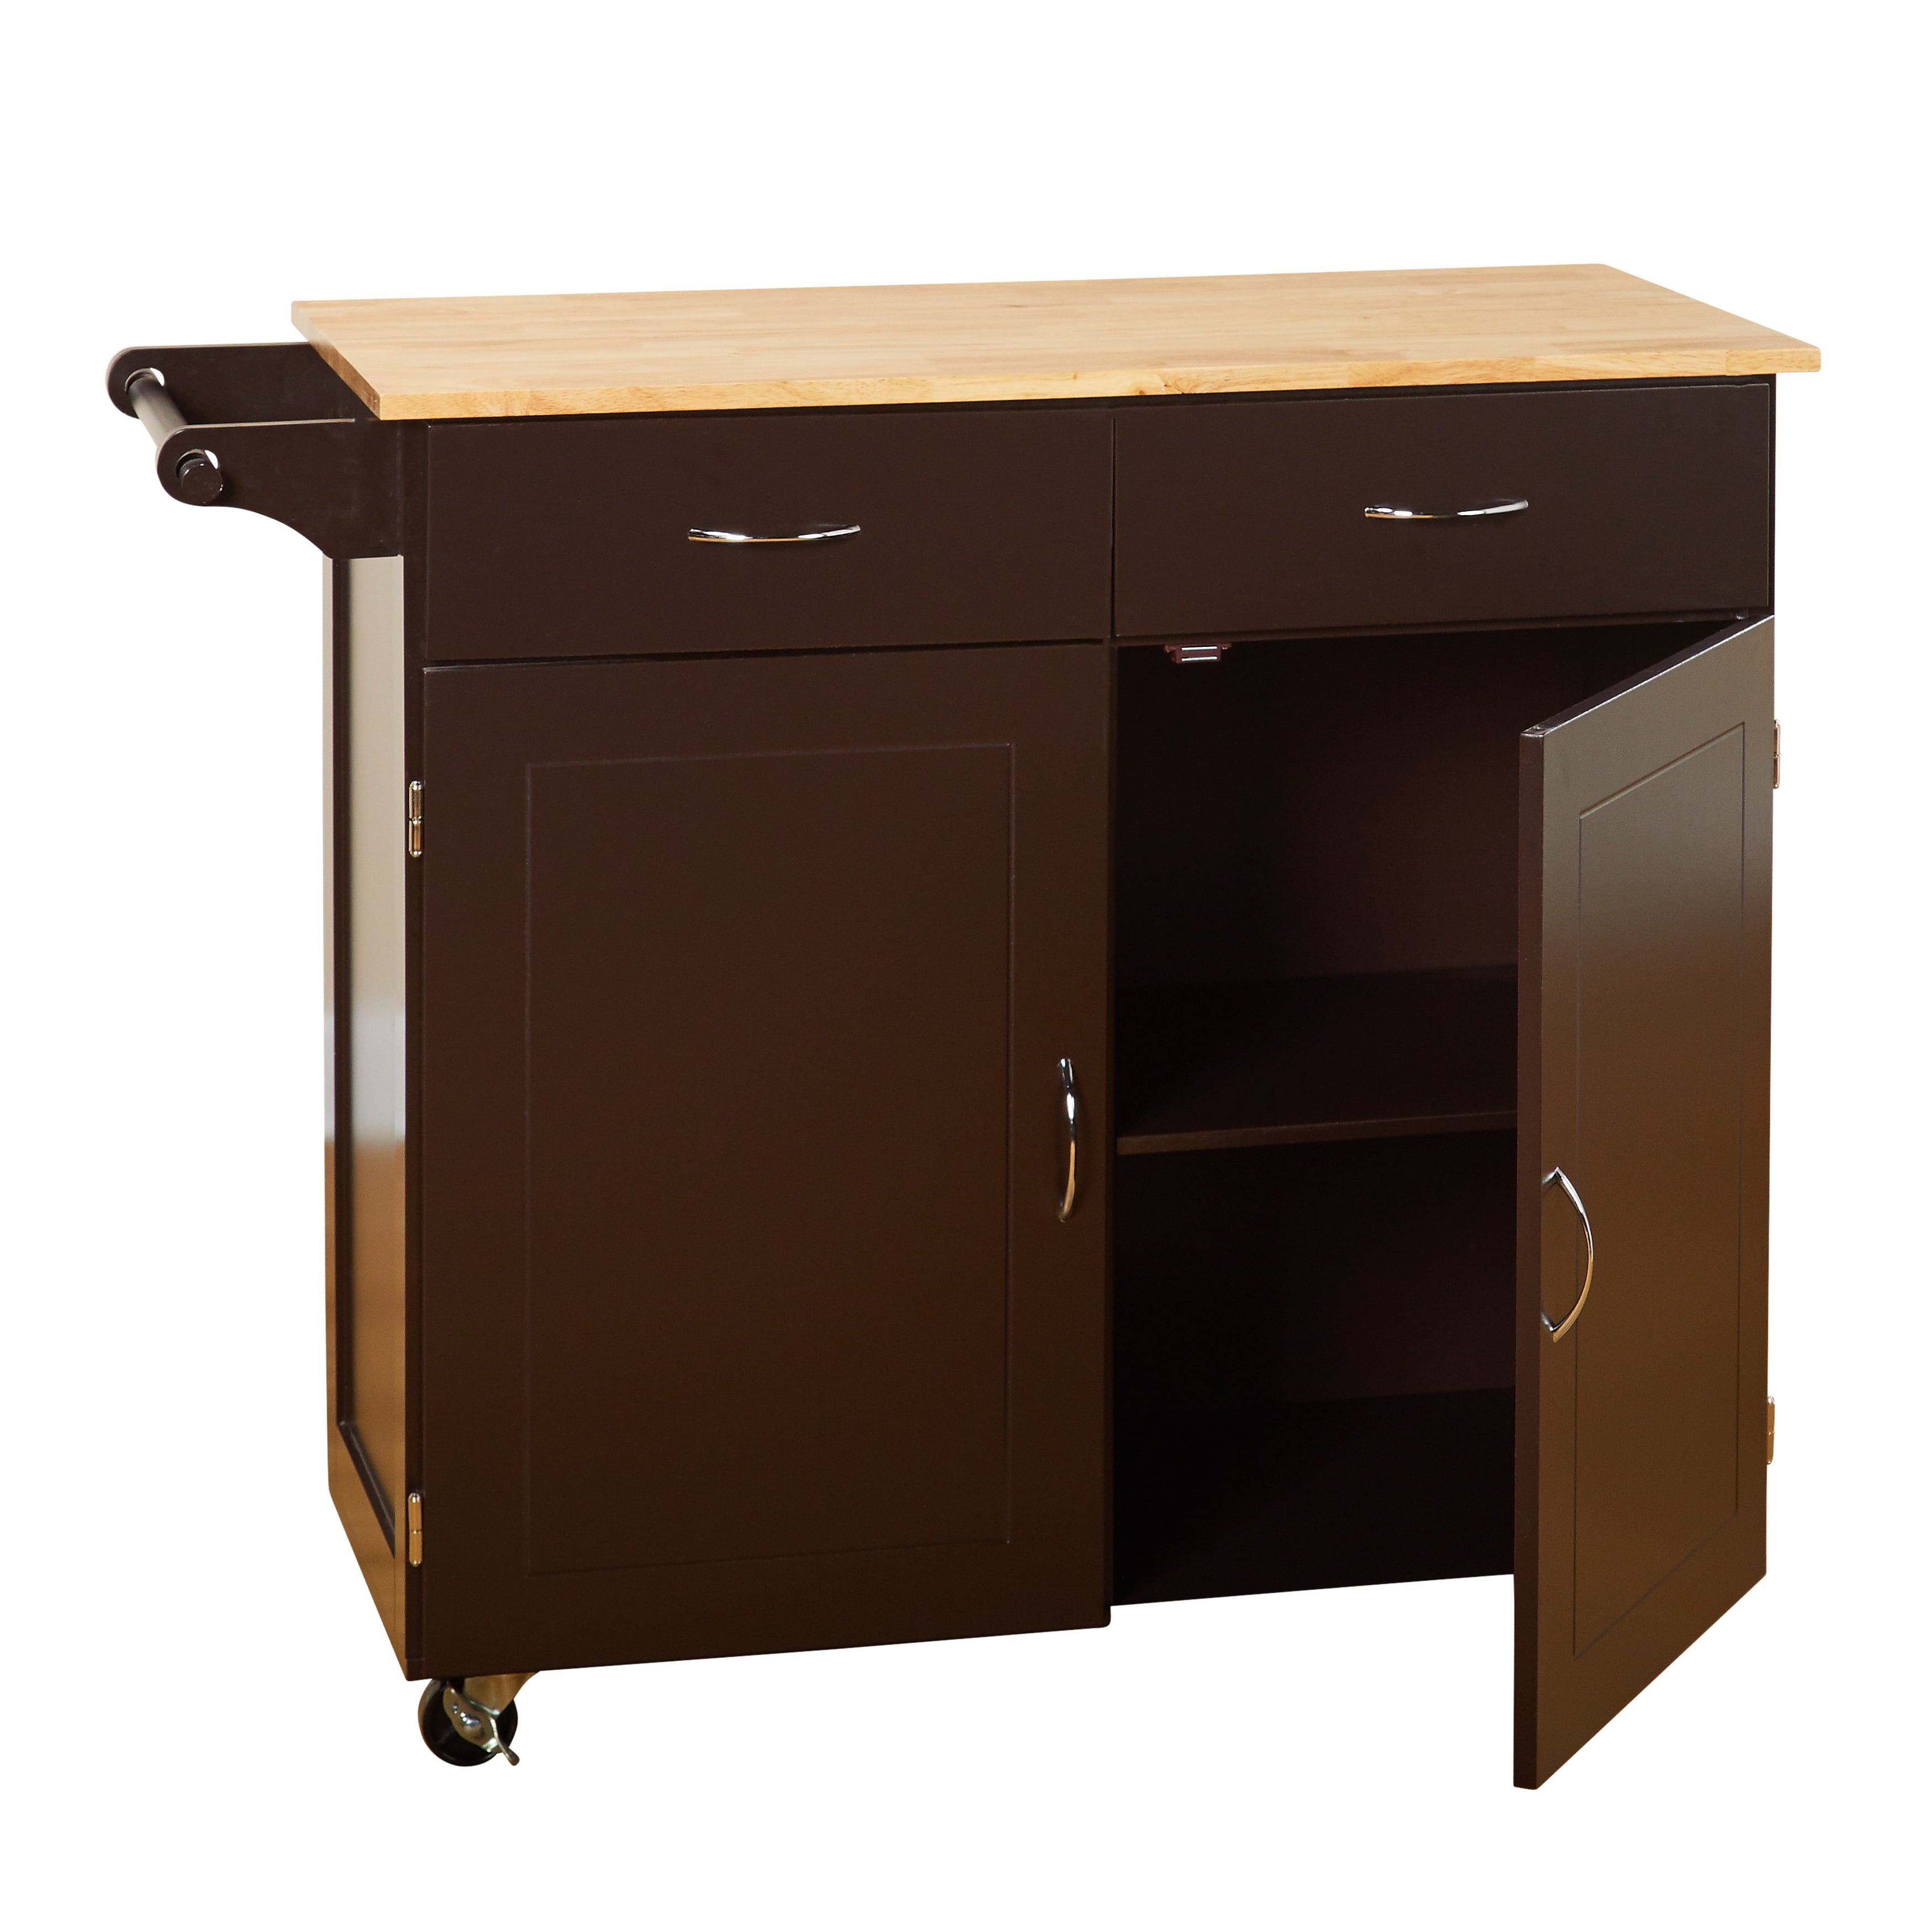 TMS Large Kitchen Cart with Rubber wood Top， Espresso